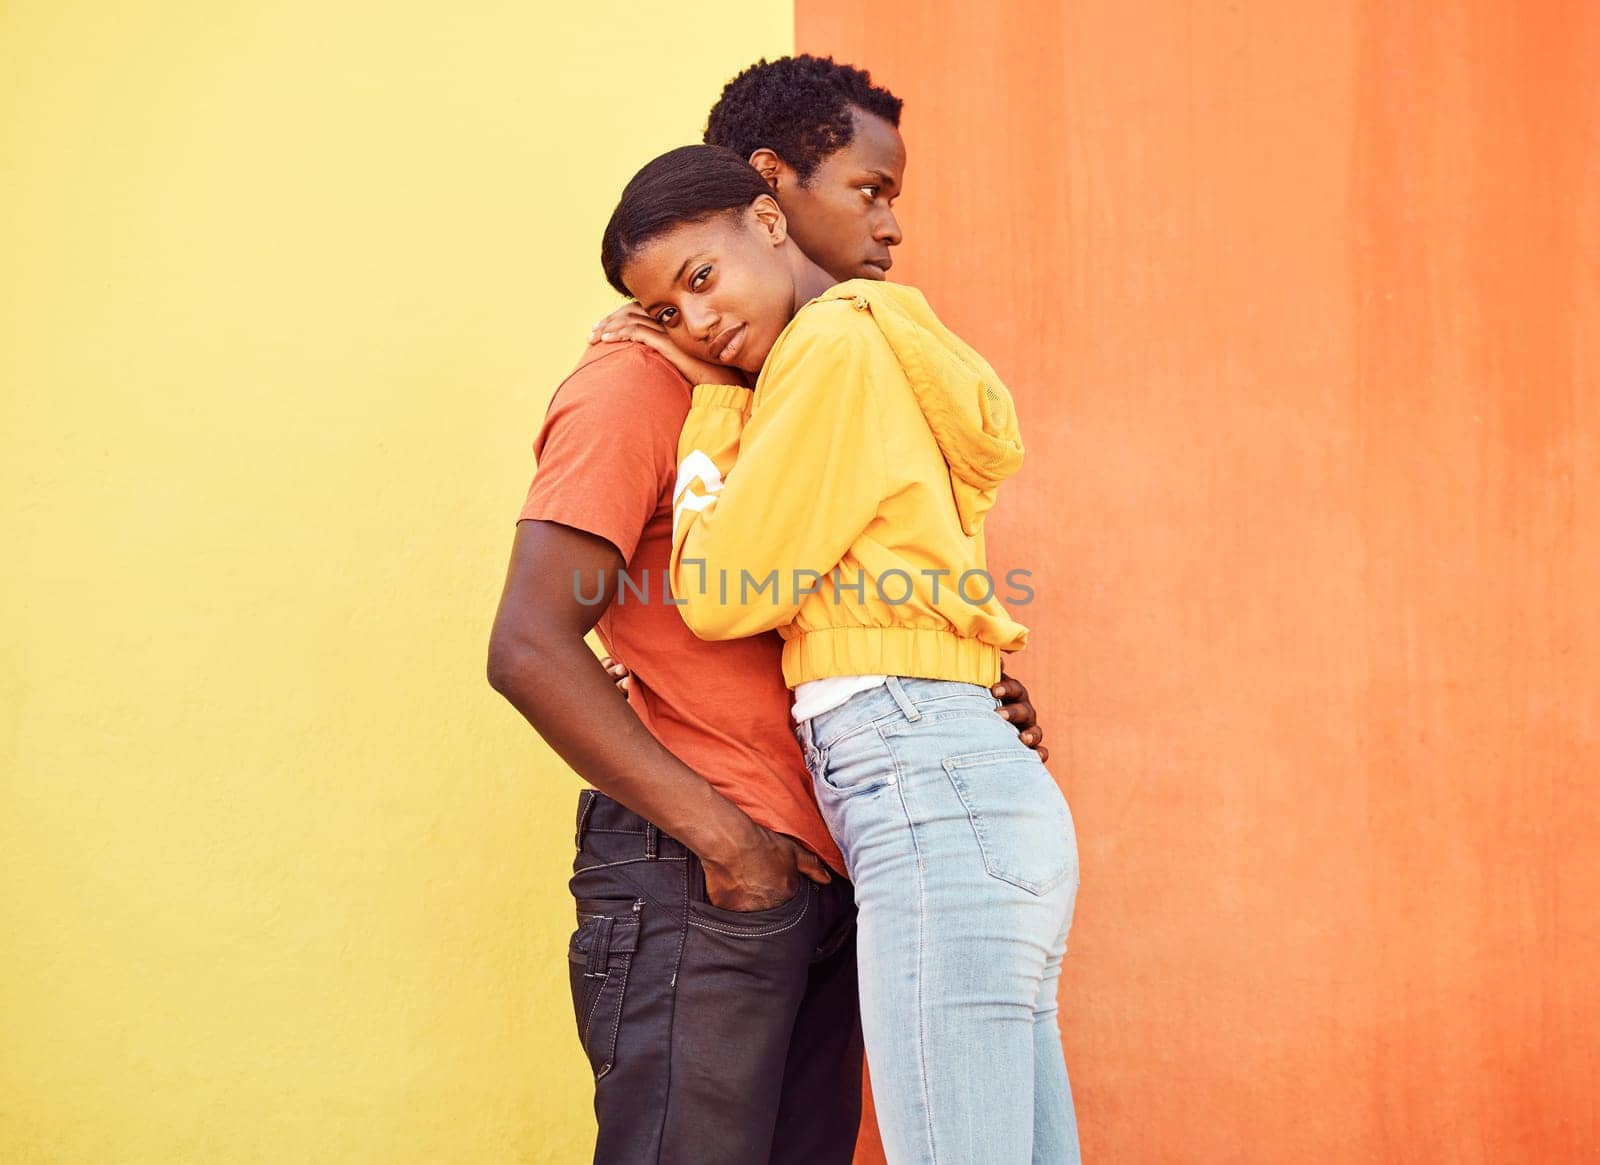 Love, hug and comfort with a black couple together outside on a color wall background for romance or dating. Hugging, date and consoling with a man and woman holding each other in support or care.